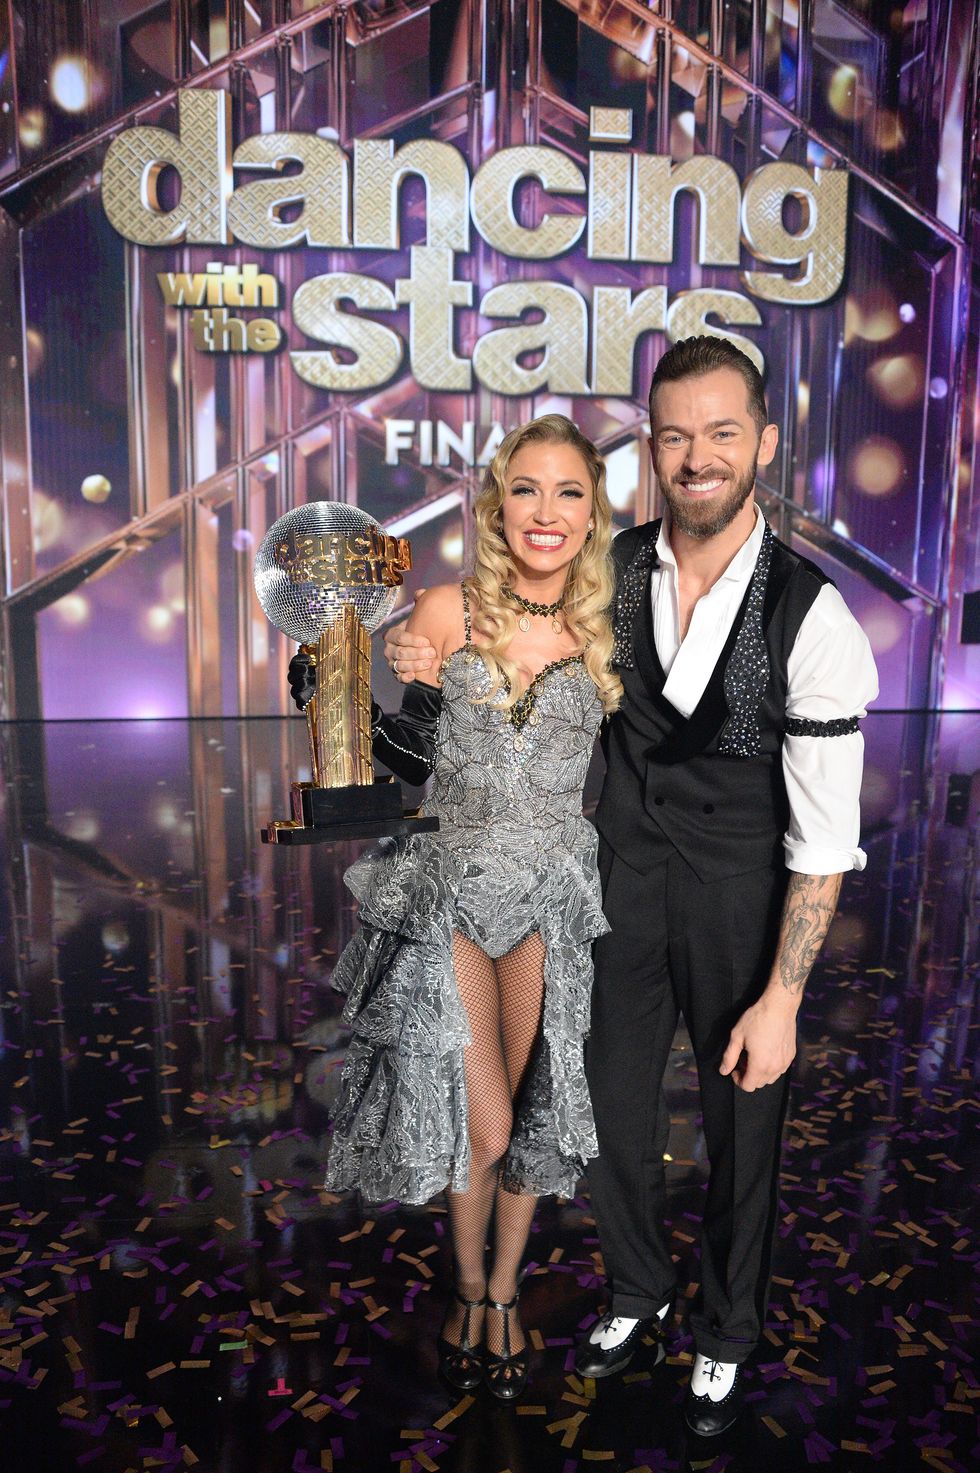 dancing with the stars   finale  four celebrity and pro dancer couples dance and compete in the live season finale where one couple will win the coveted mirrorball trophy, monday, nov 23 800 1000 pm est, on abc eric mccandlessabc via getty imageskaitlyn bristowe, artem chigvintsev